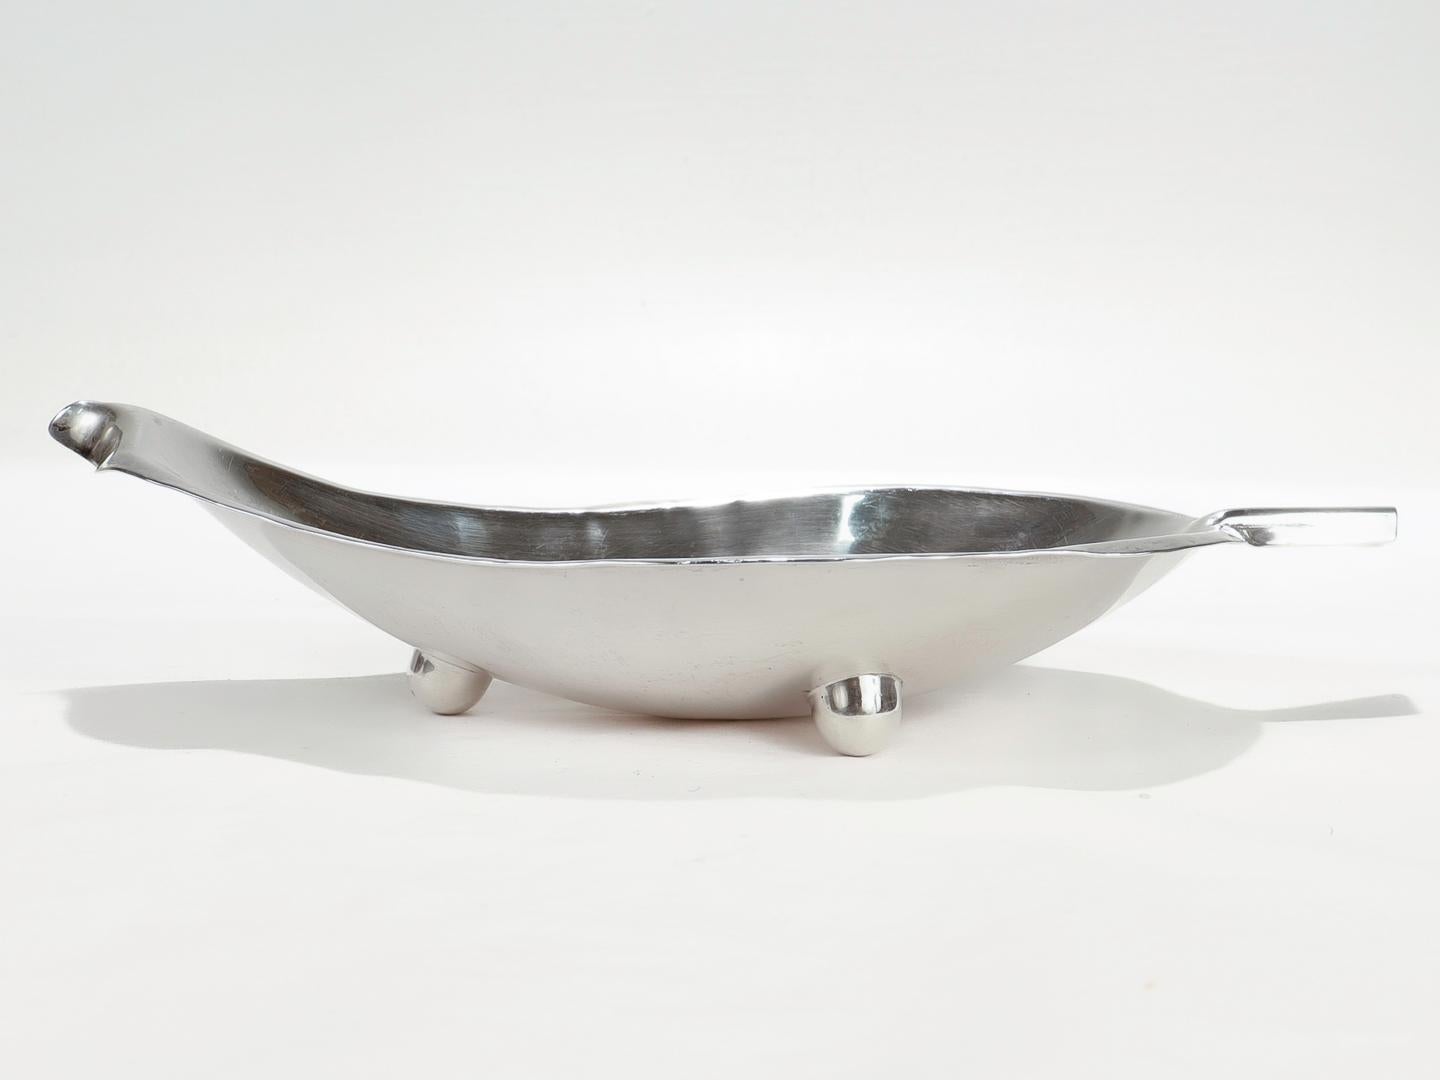 A fine American Modernist leaf bowl.

In sterling silver.

By Alfredo Sciarotta.

With an organic edge, 'stem' tab handle, and ball feet. 

Handmade in Sciarrotta's silver shop and retailed by Black, Starr, and Gorham. 

Simply a fine example of